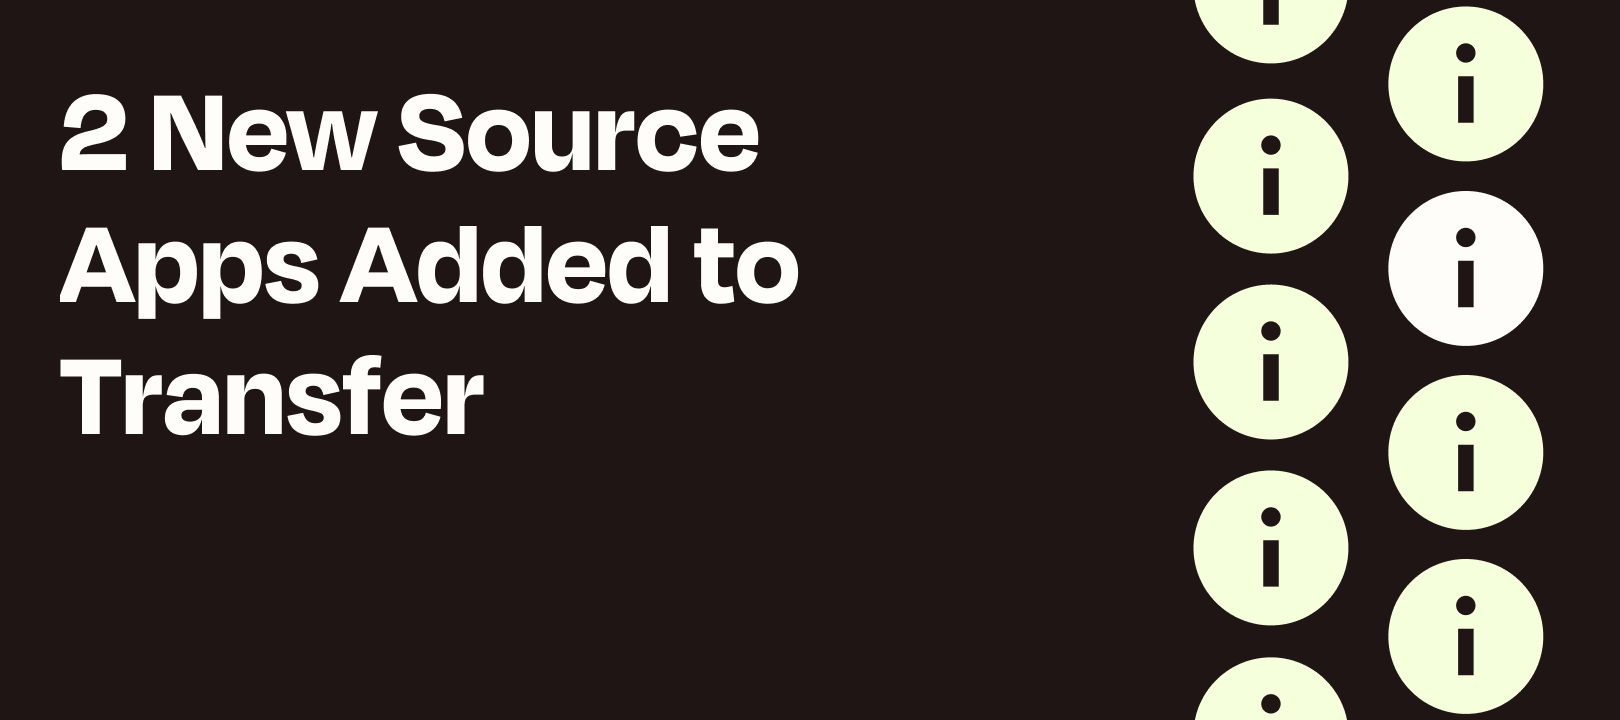 Transfer by Zapier Adds 2 New Sources: Trello and Notion